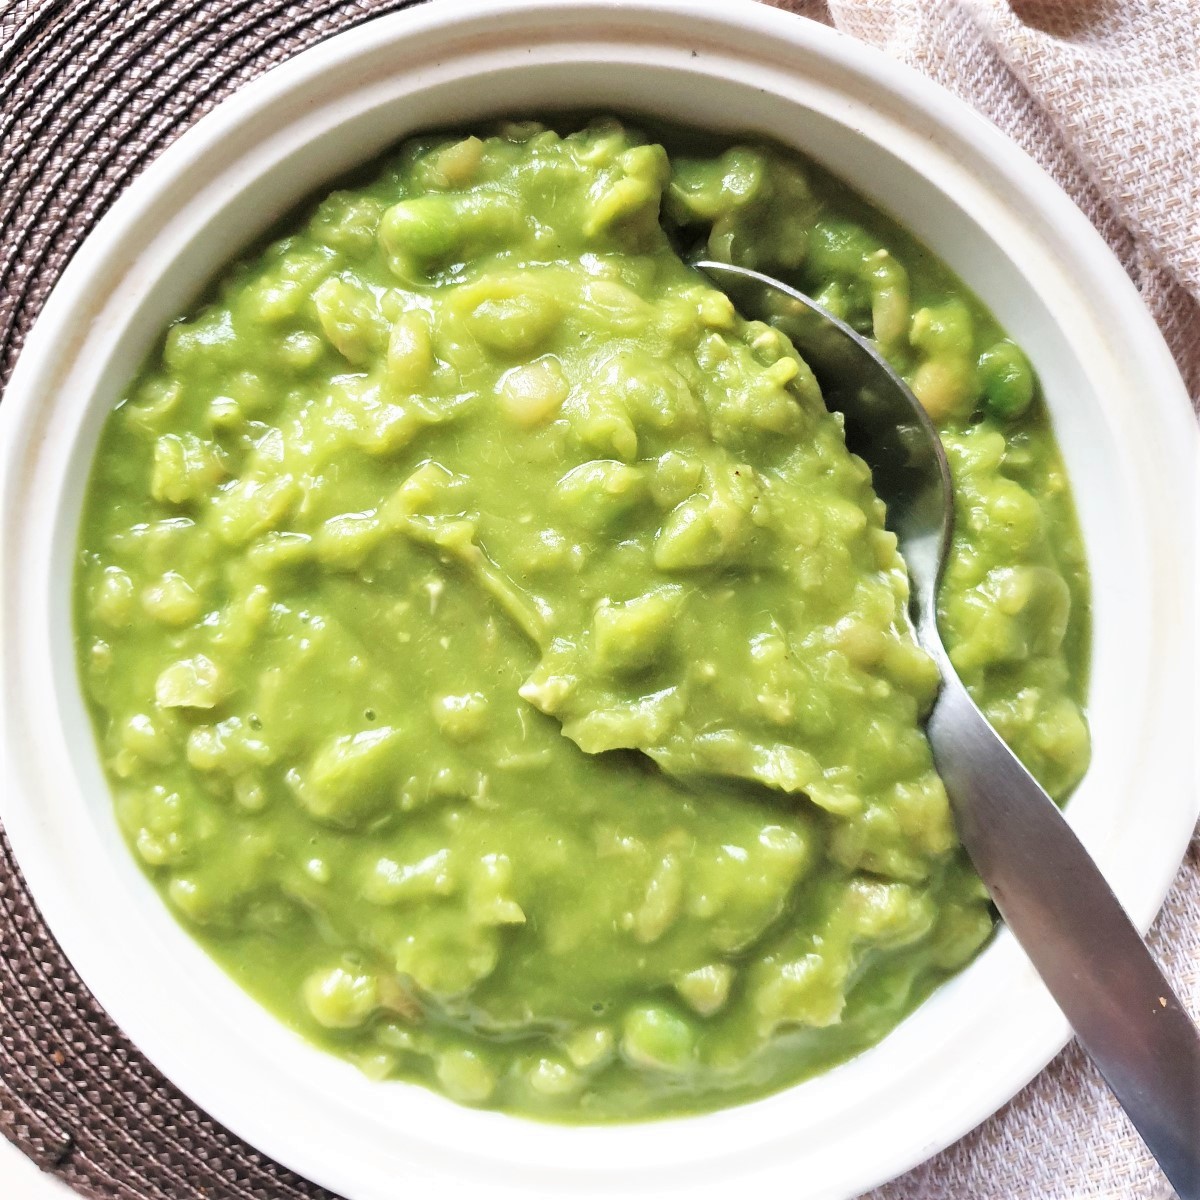 A large bowl of mushy peas with a spoon.